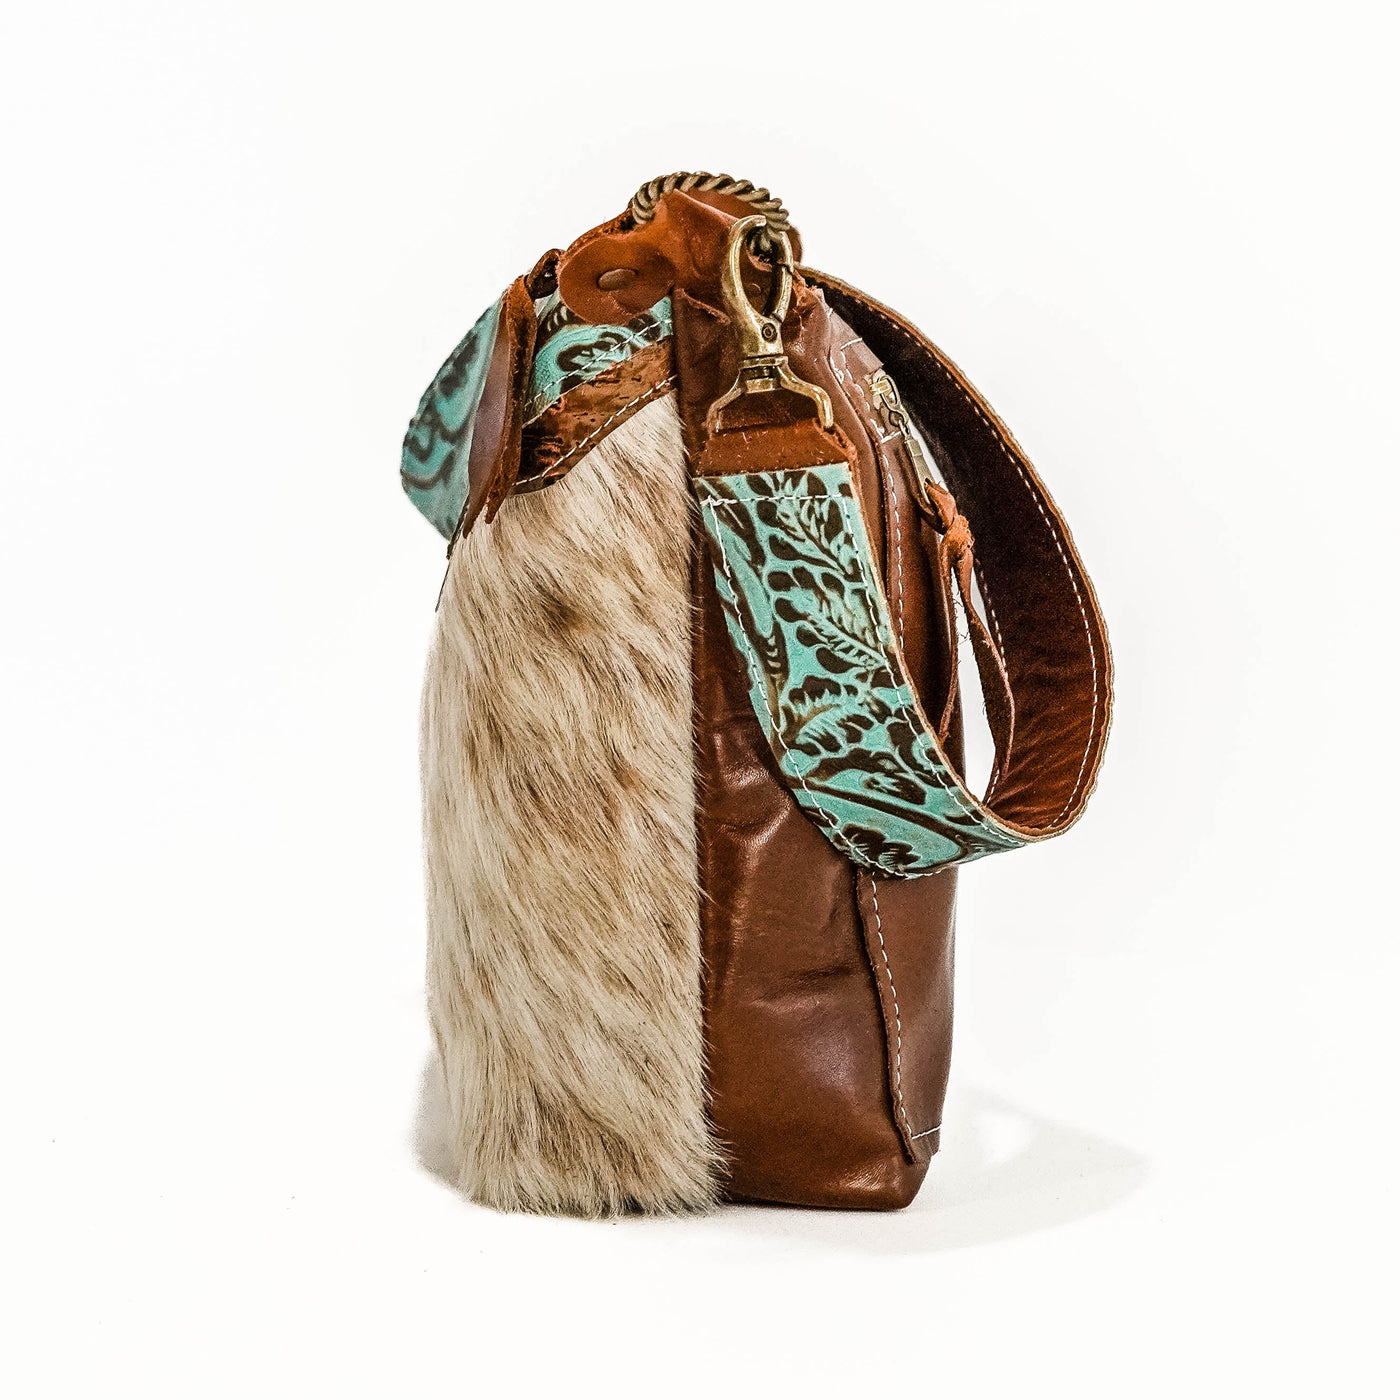 Annie - Fuzzy Longhorn w/ Turquoise Tool-Annie-Western-Cowhide-Bags-Handmade-Products-Gifts-Dancing Cactus Designs